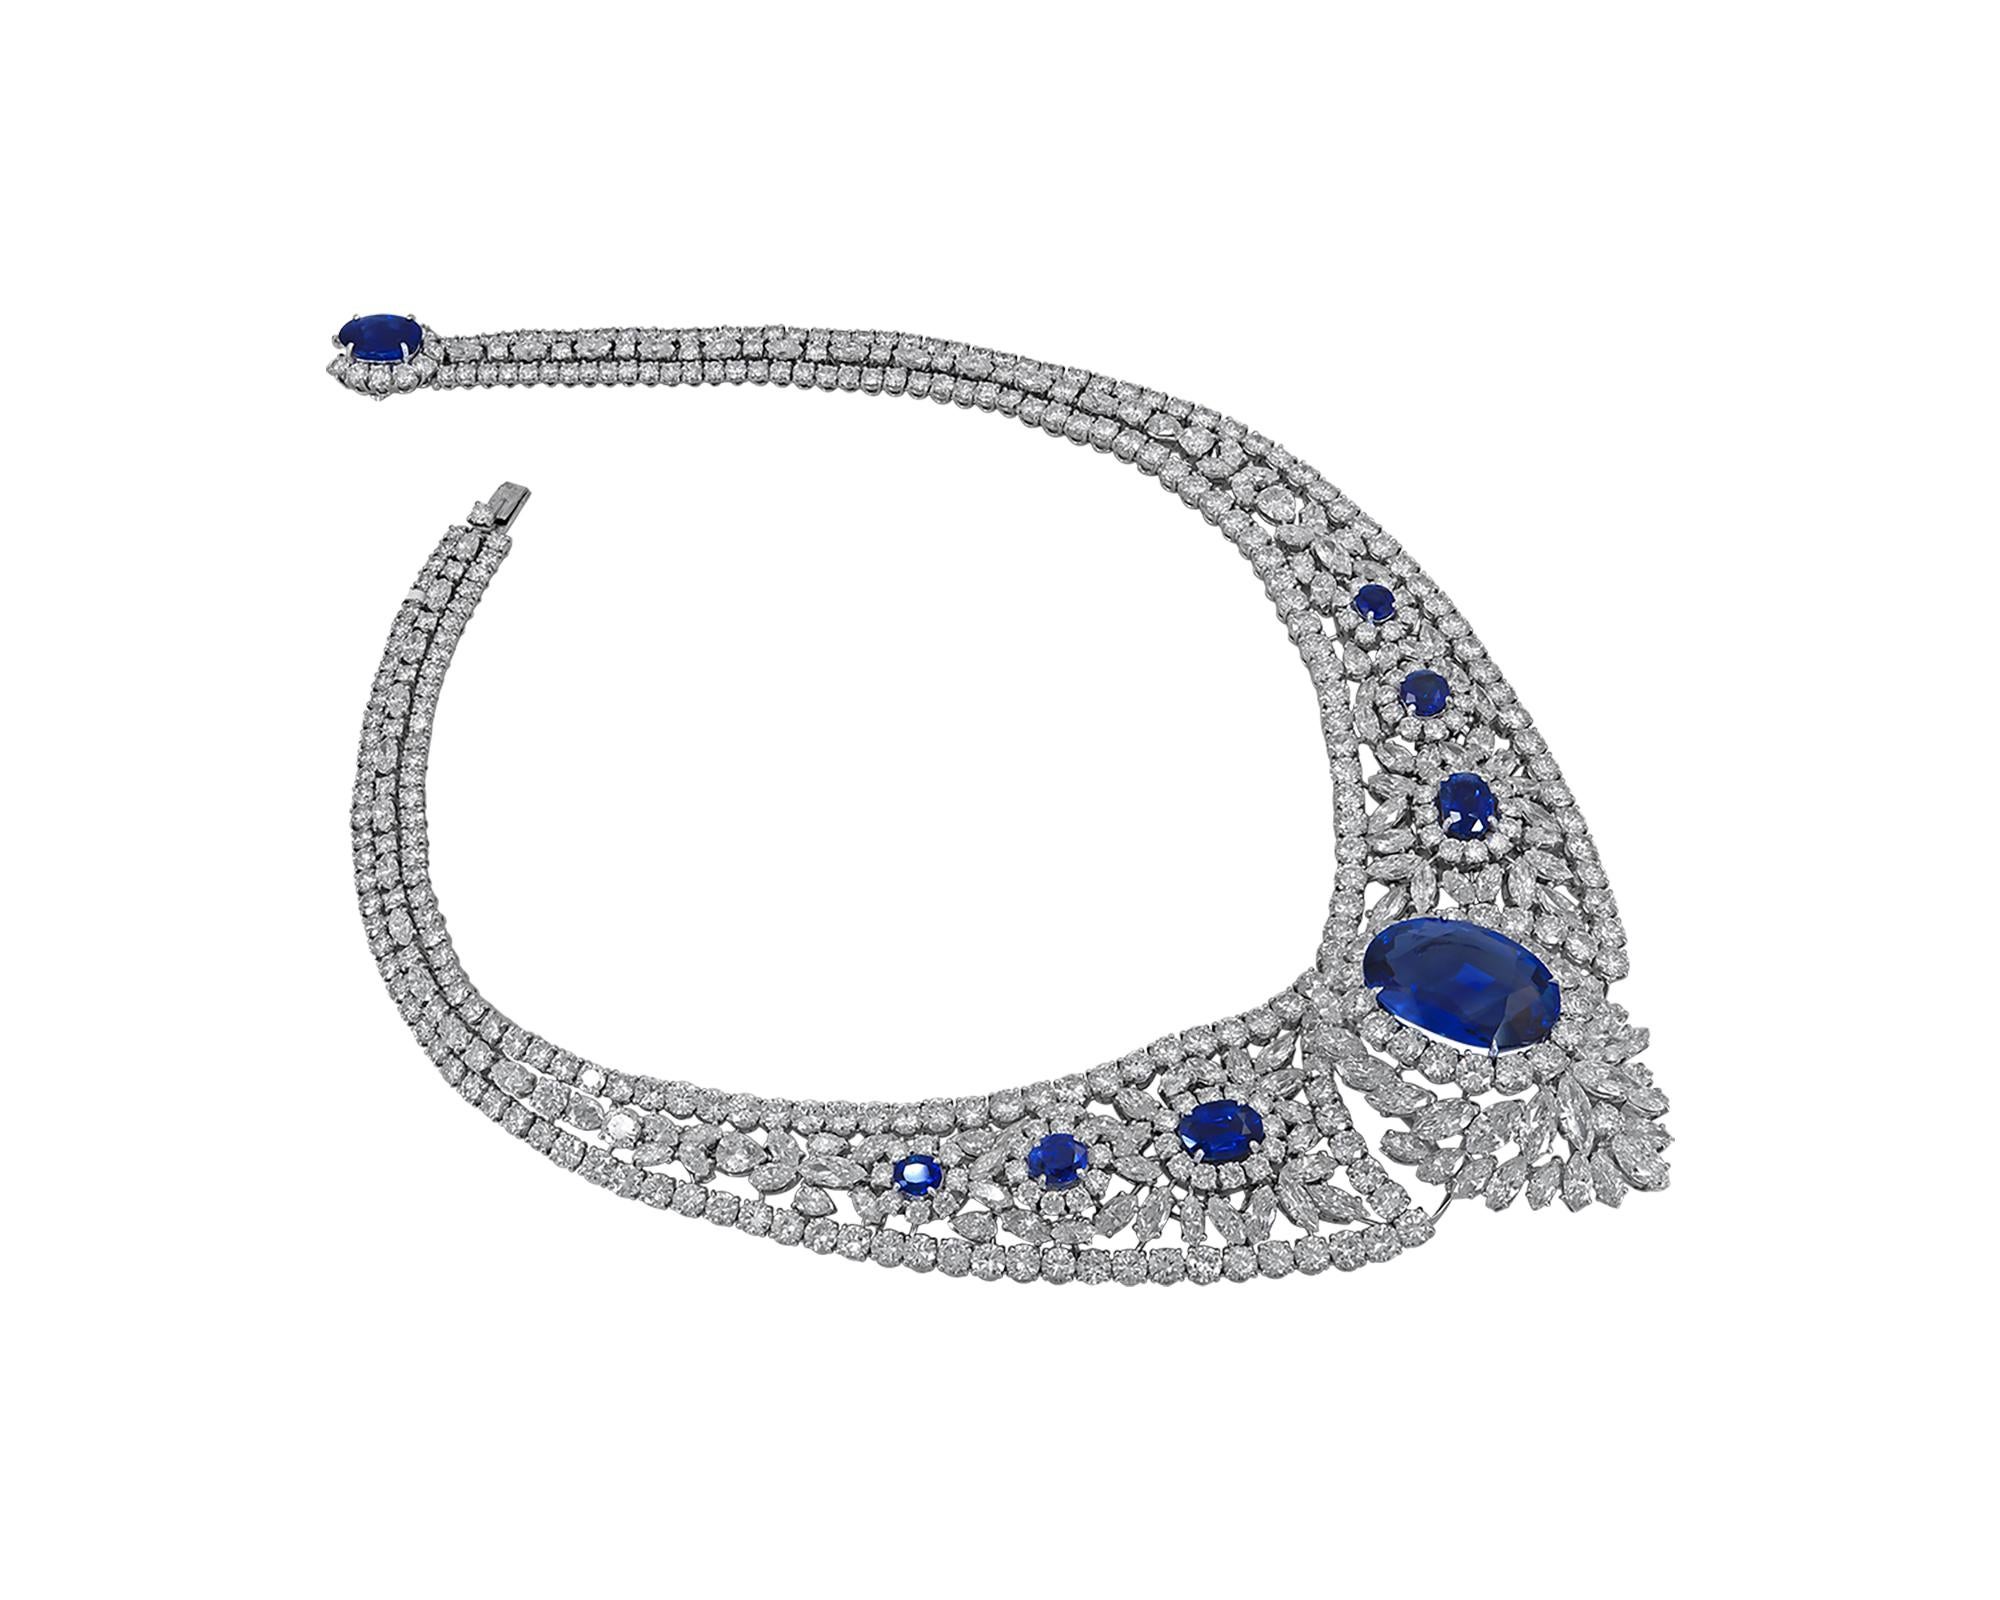 A stunning necklace featuring a 30.16 oval sapphire in the center. The sapphire is certified by GRS Lab, stating that it's a natural gemstone of Sri Lanka origin with the indication of heat.
The necklace is embellished with 6 smaller oval sapphires